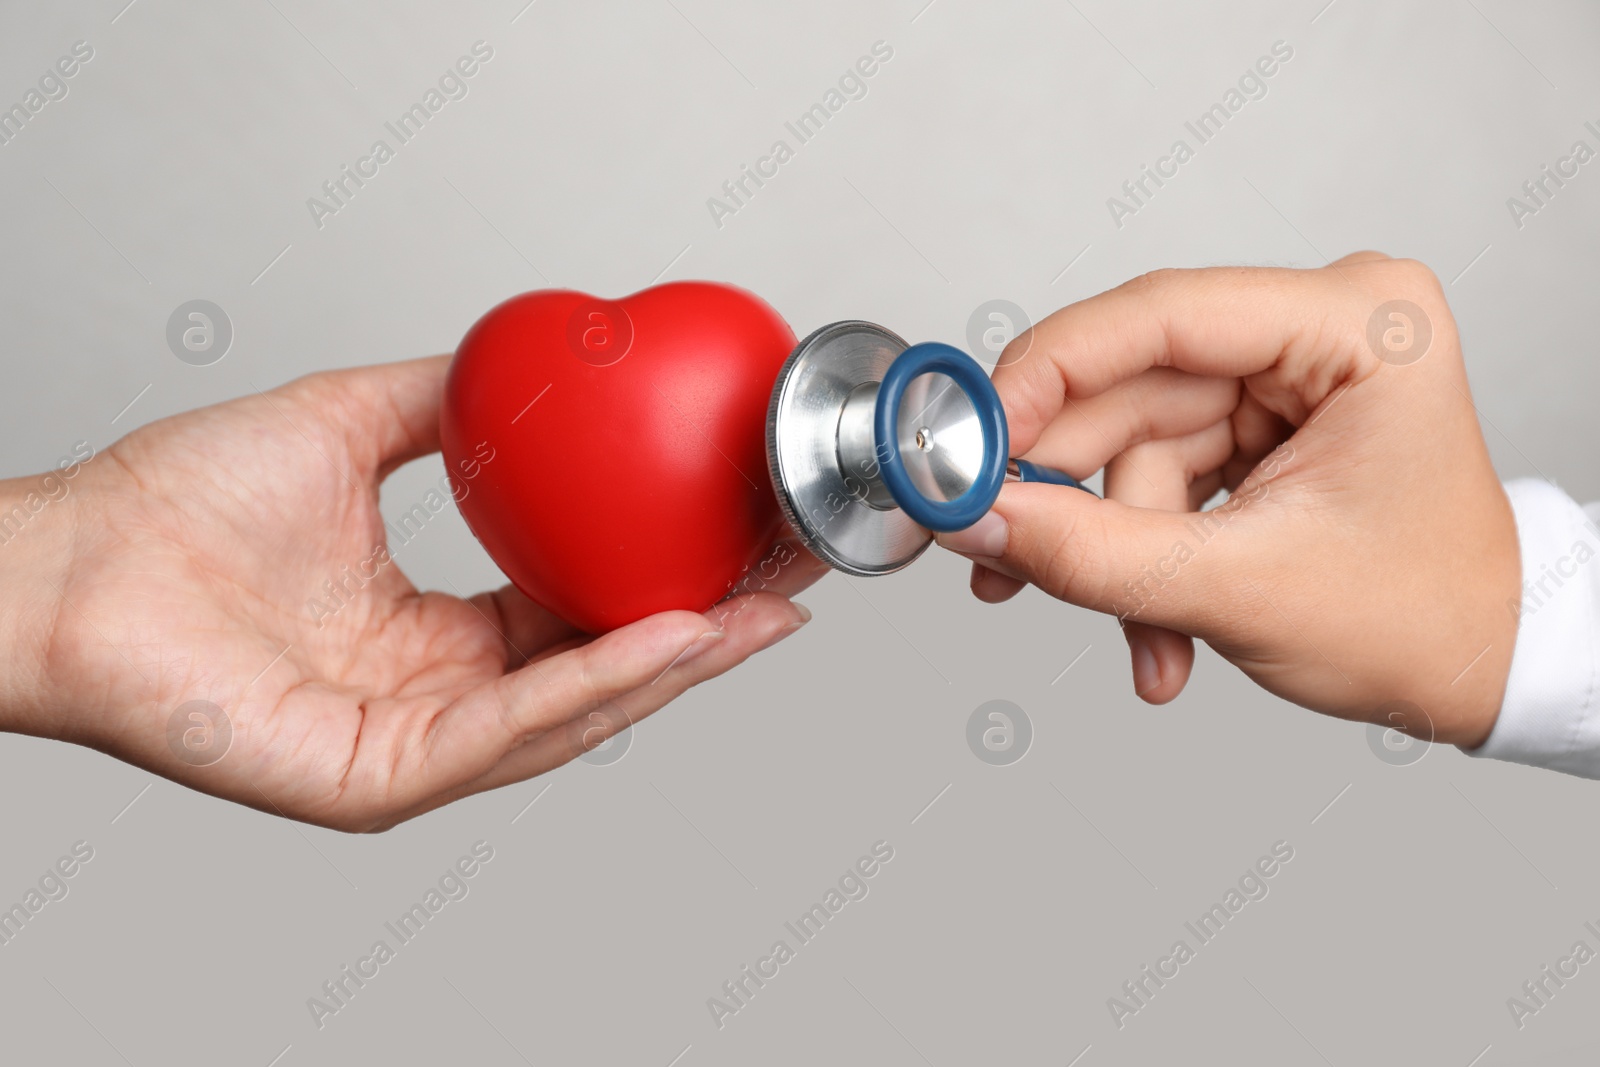 Photo of Doctor holding stethoscope near toy heart in patient's hand against grey background, closeup. Pulse checking